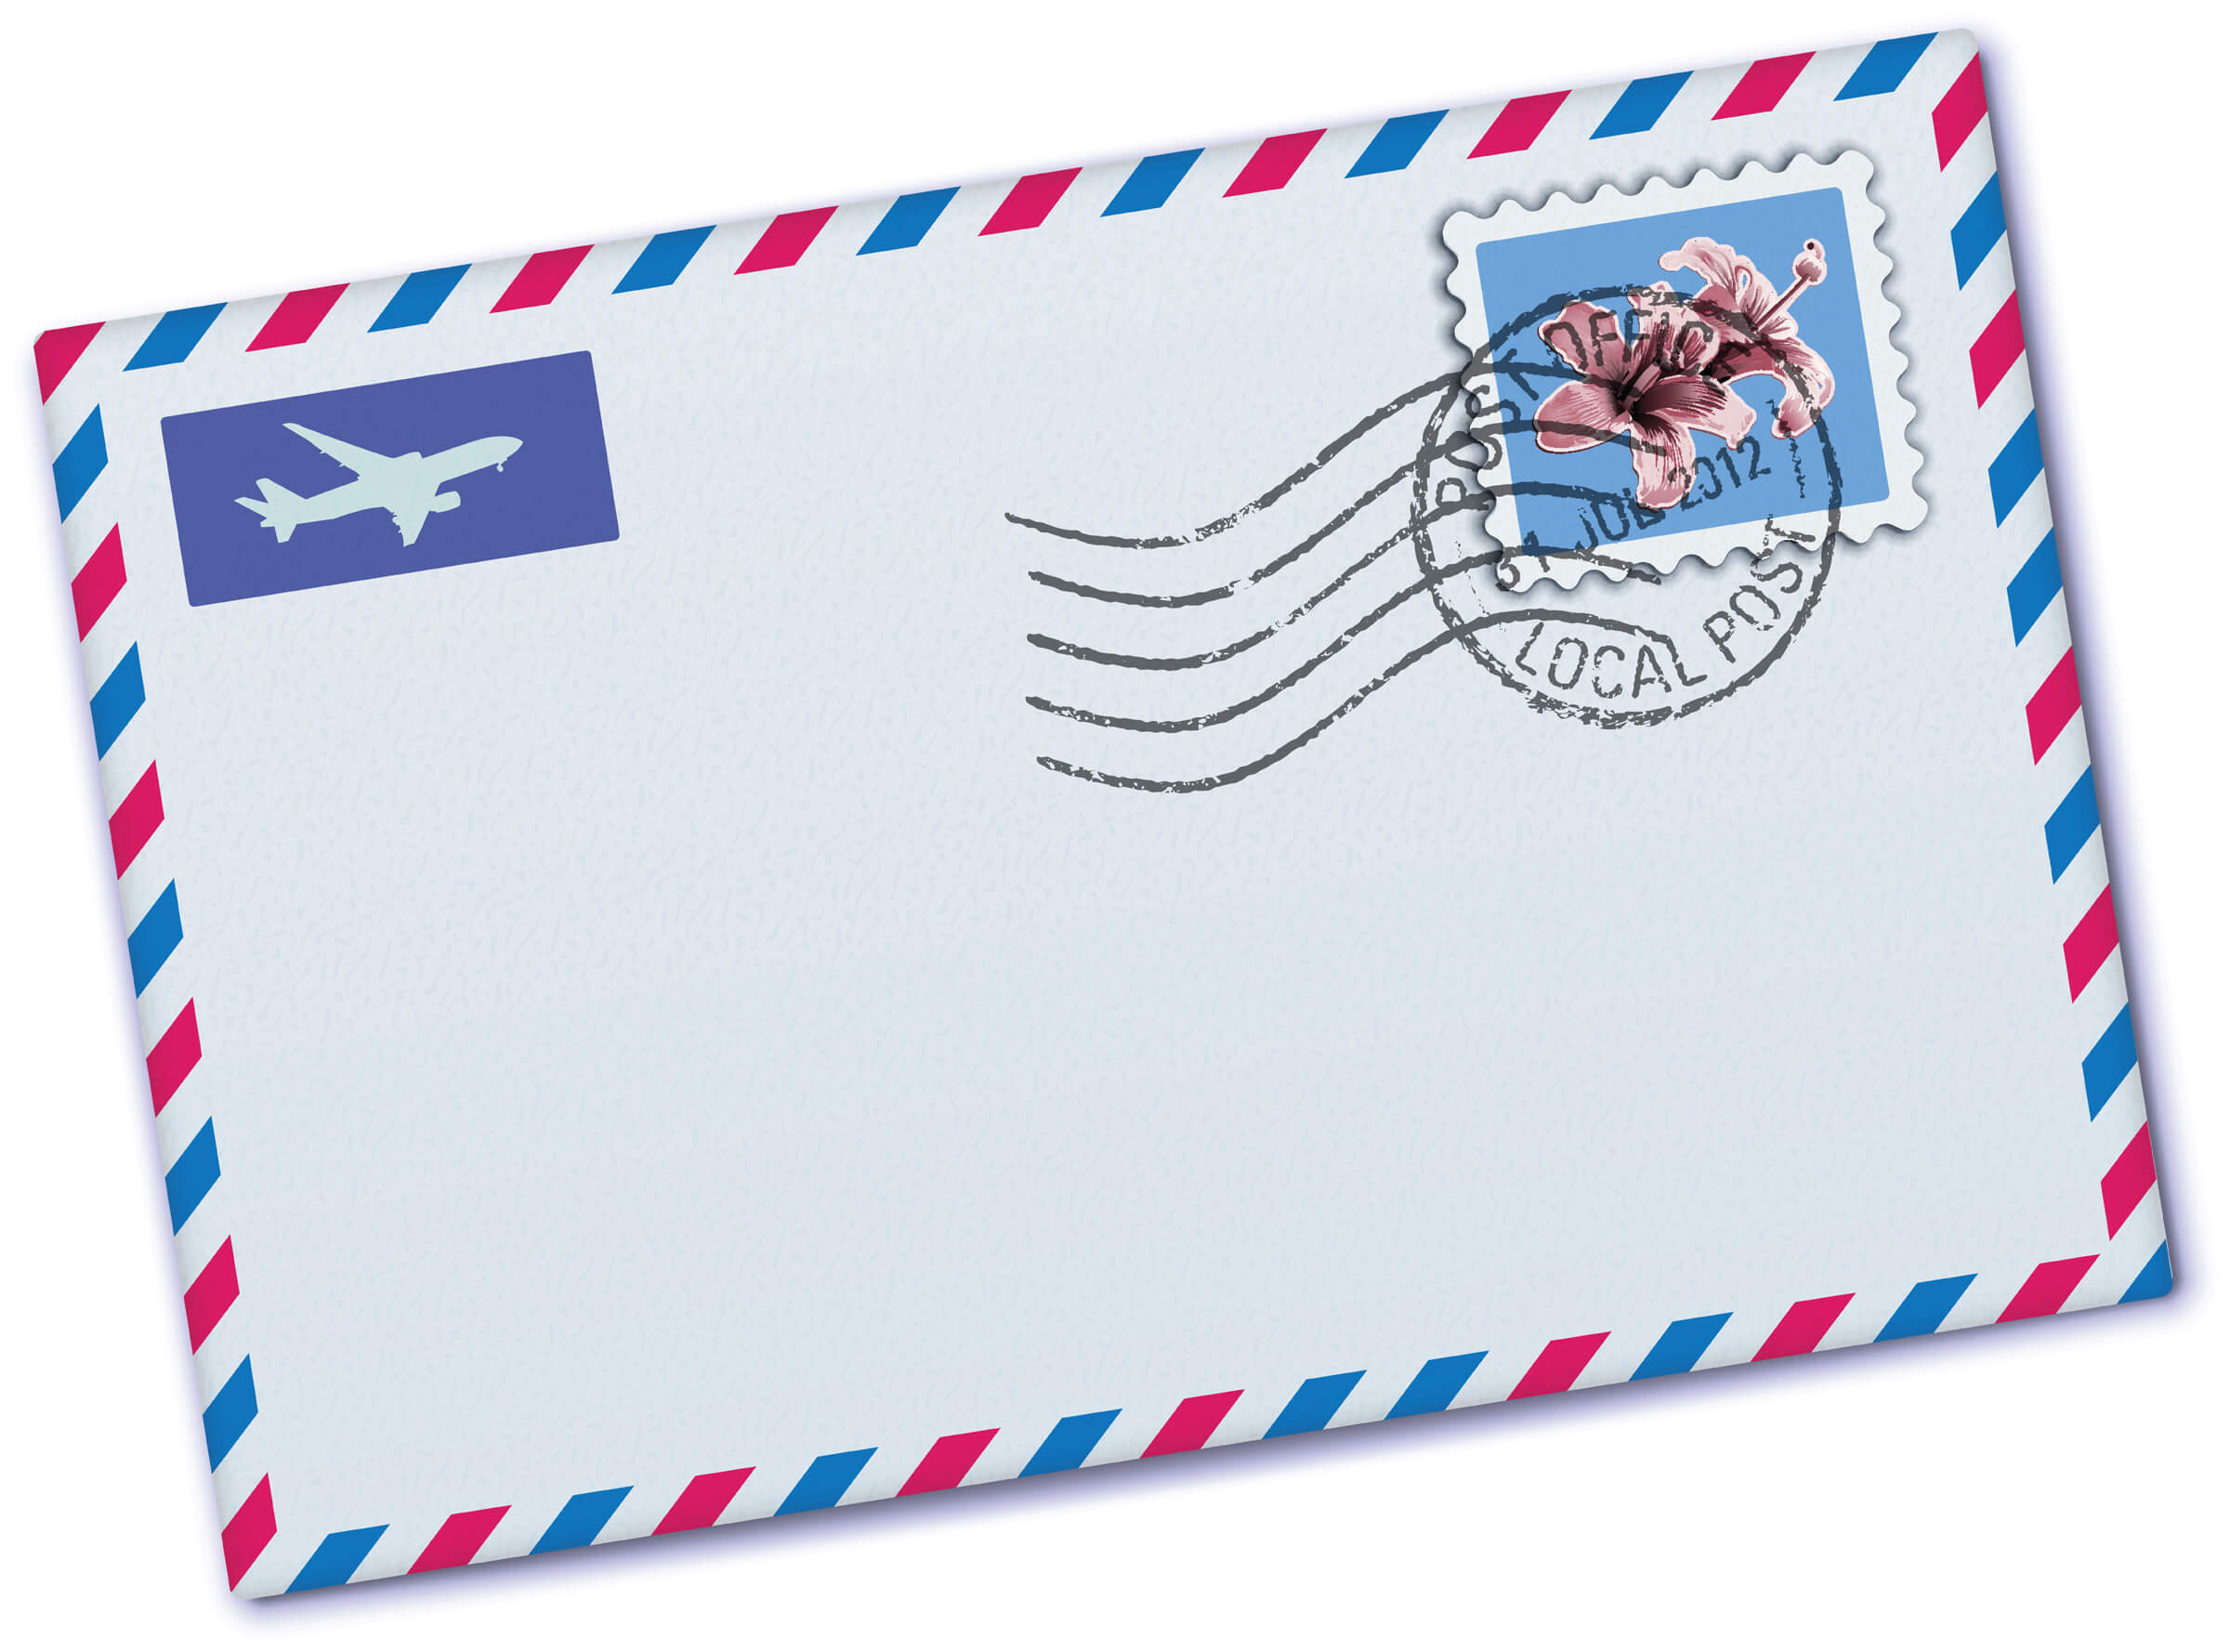 usps-delivers-first-class-direct-mail-discounts-commercial-printing